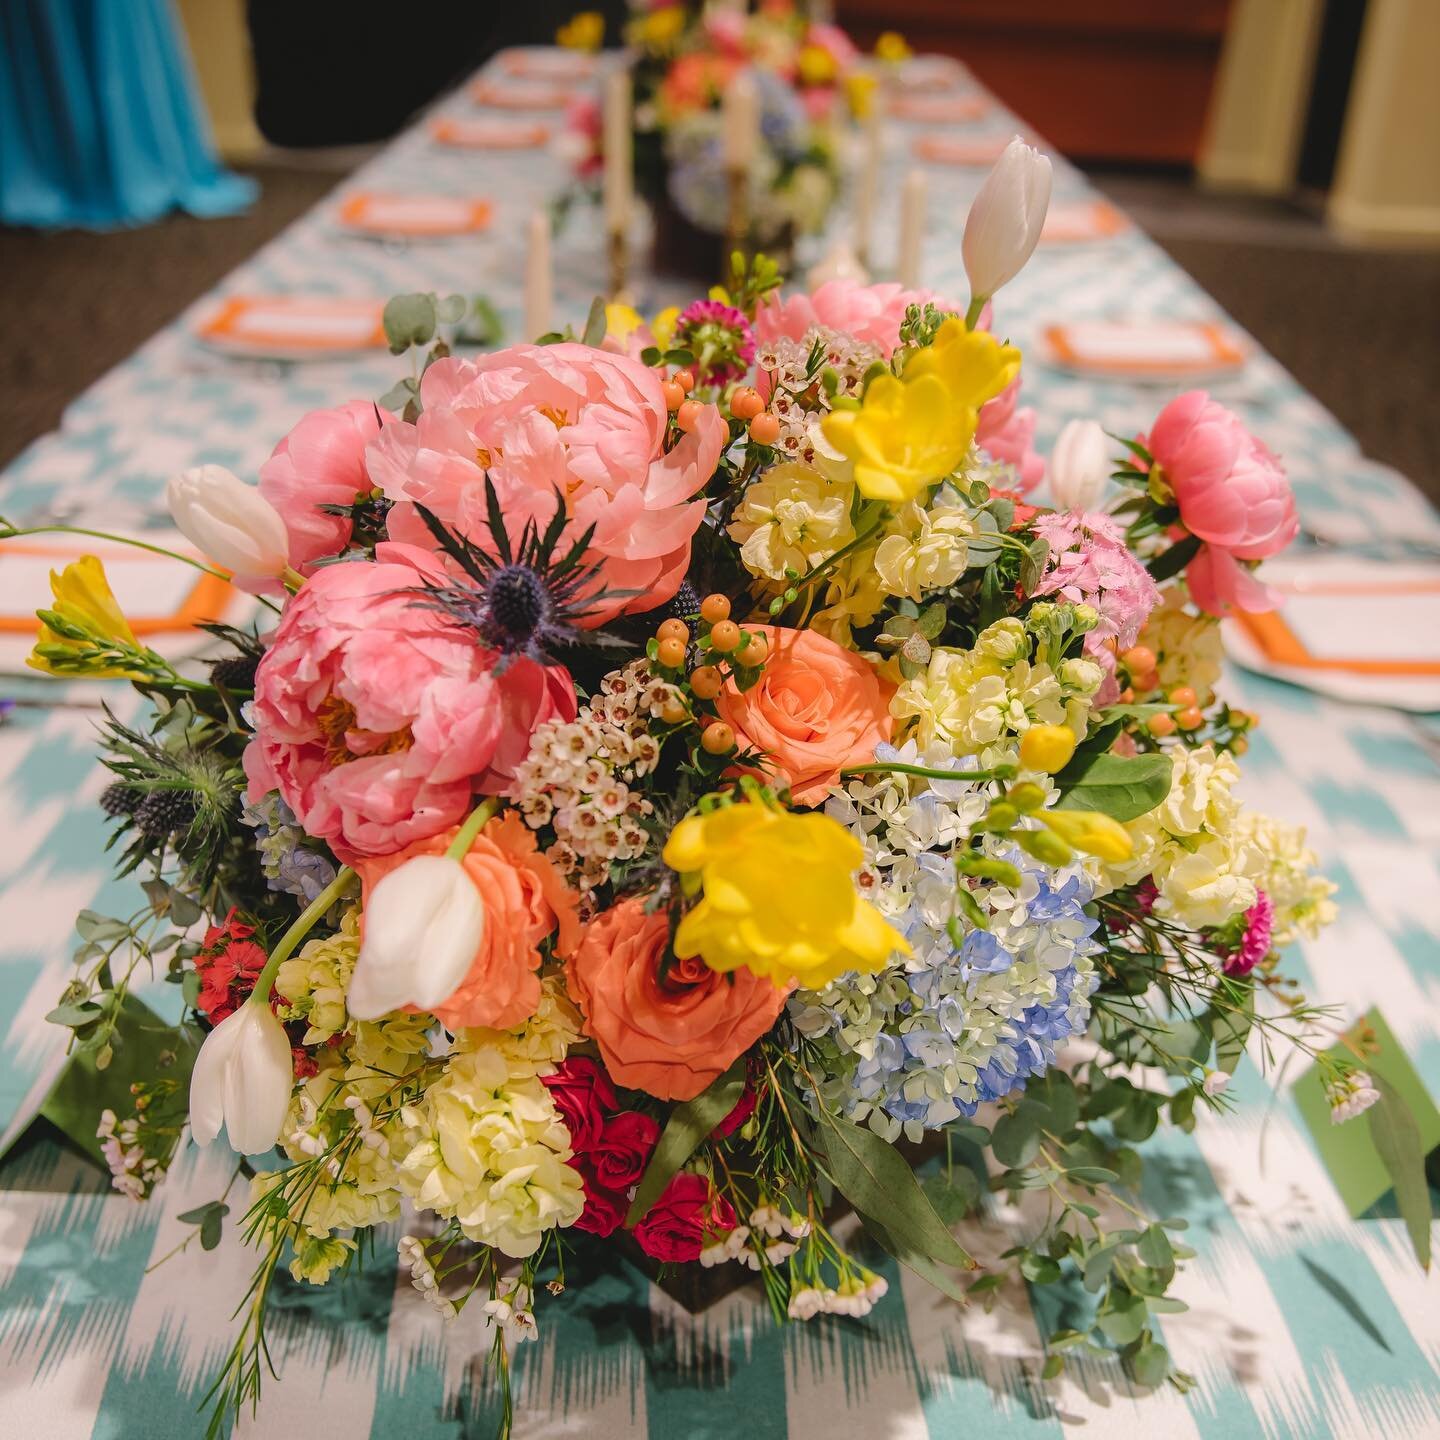 Hello, Spring!  We love all the happy colors this family incorporated into their intimate engagement dinner.